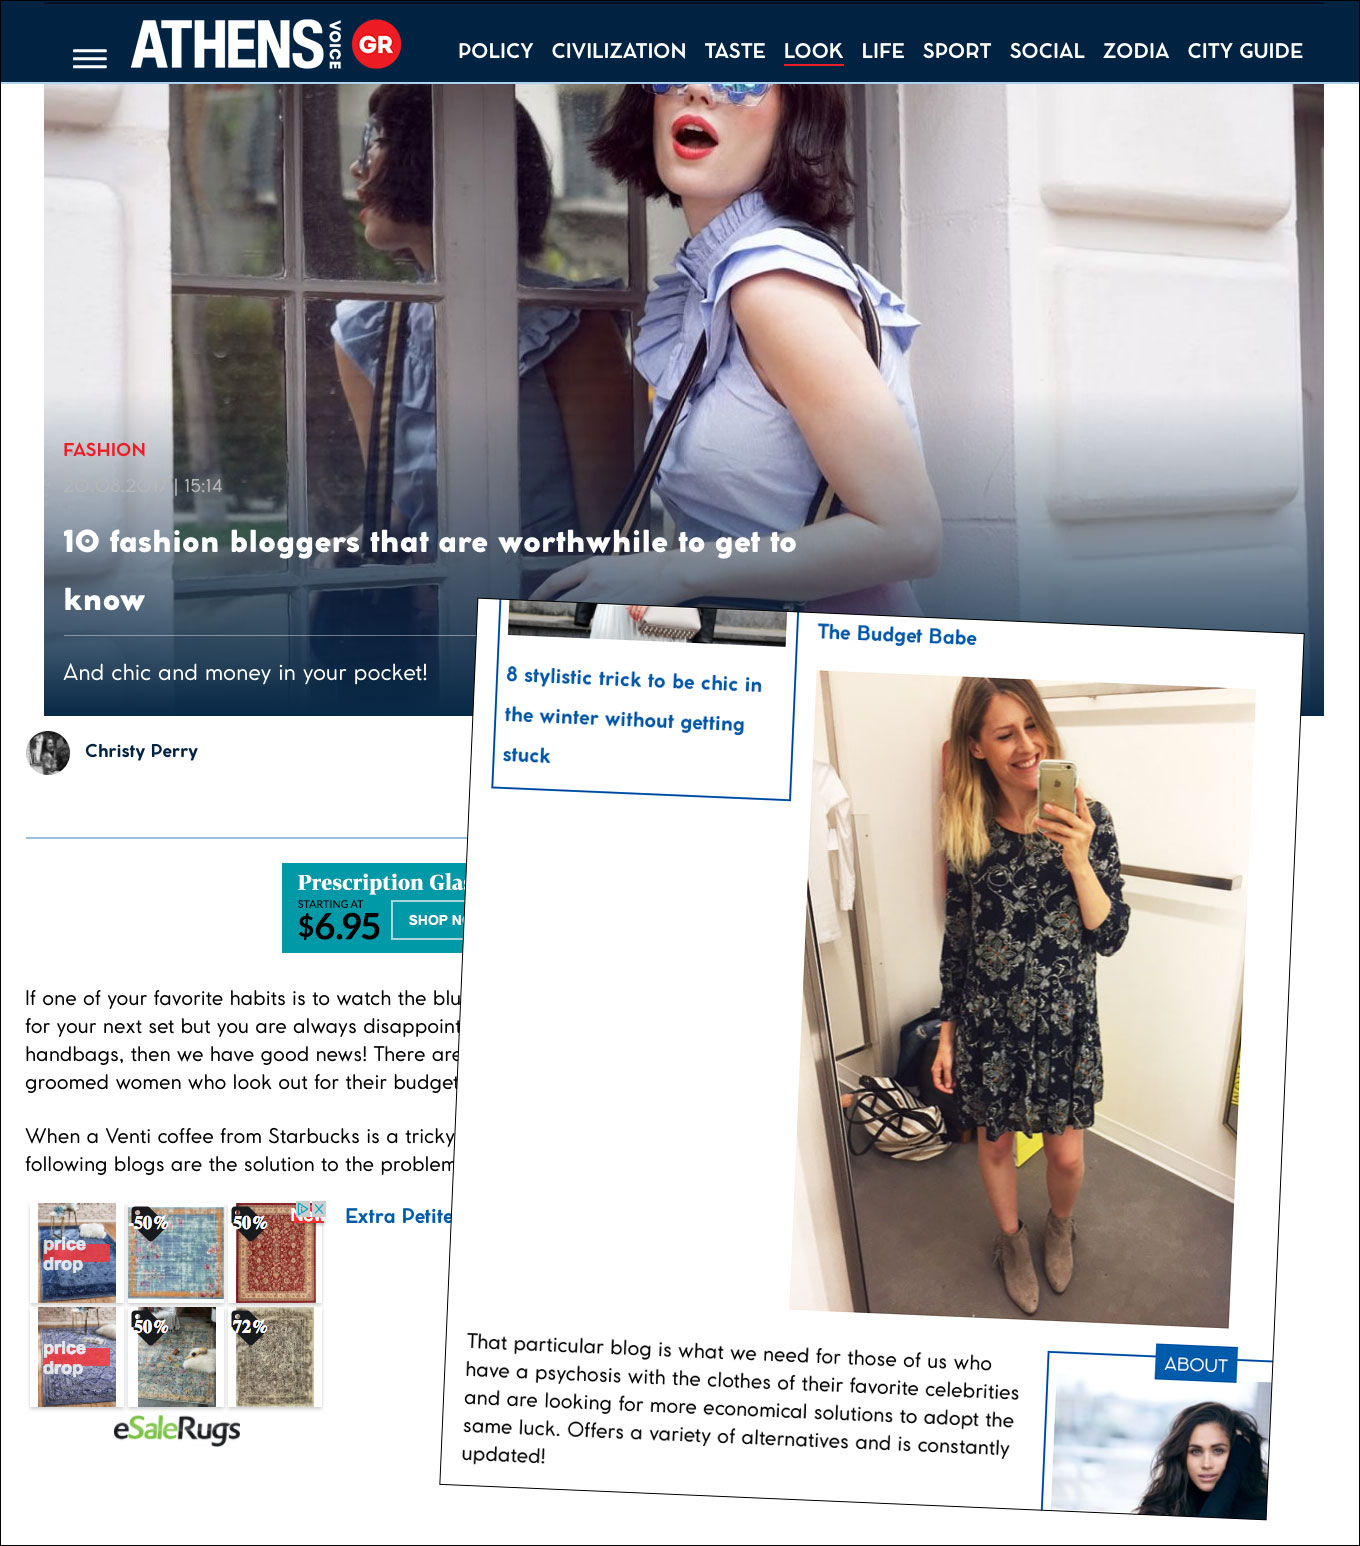 The Athens Voice rounds up the best everyday fashion bloggers on a budget